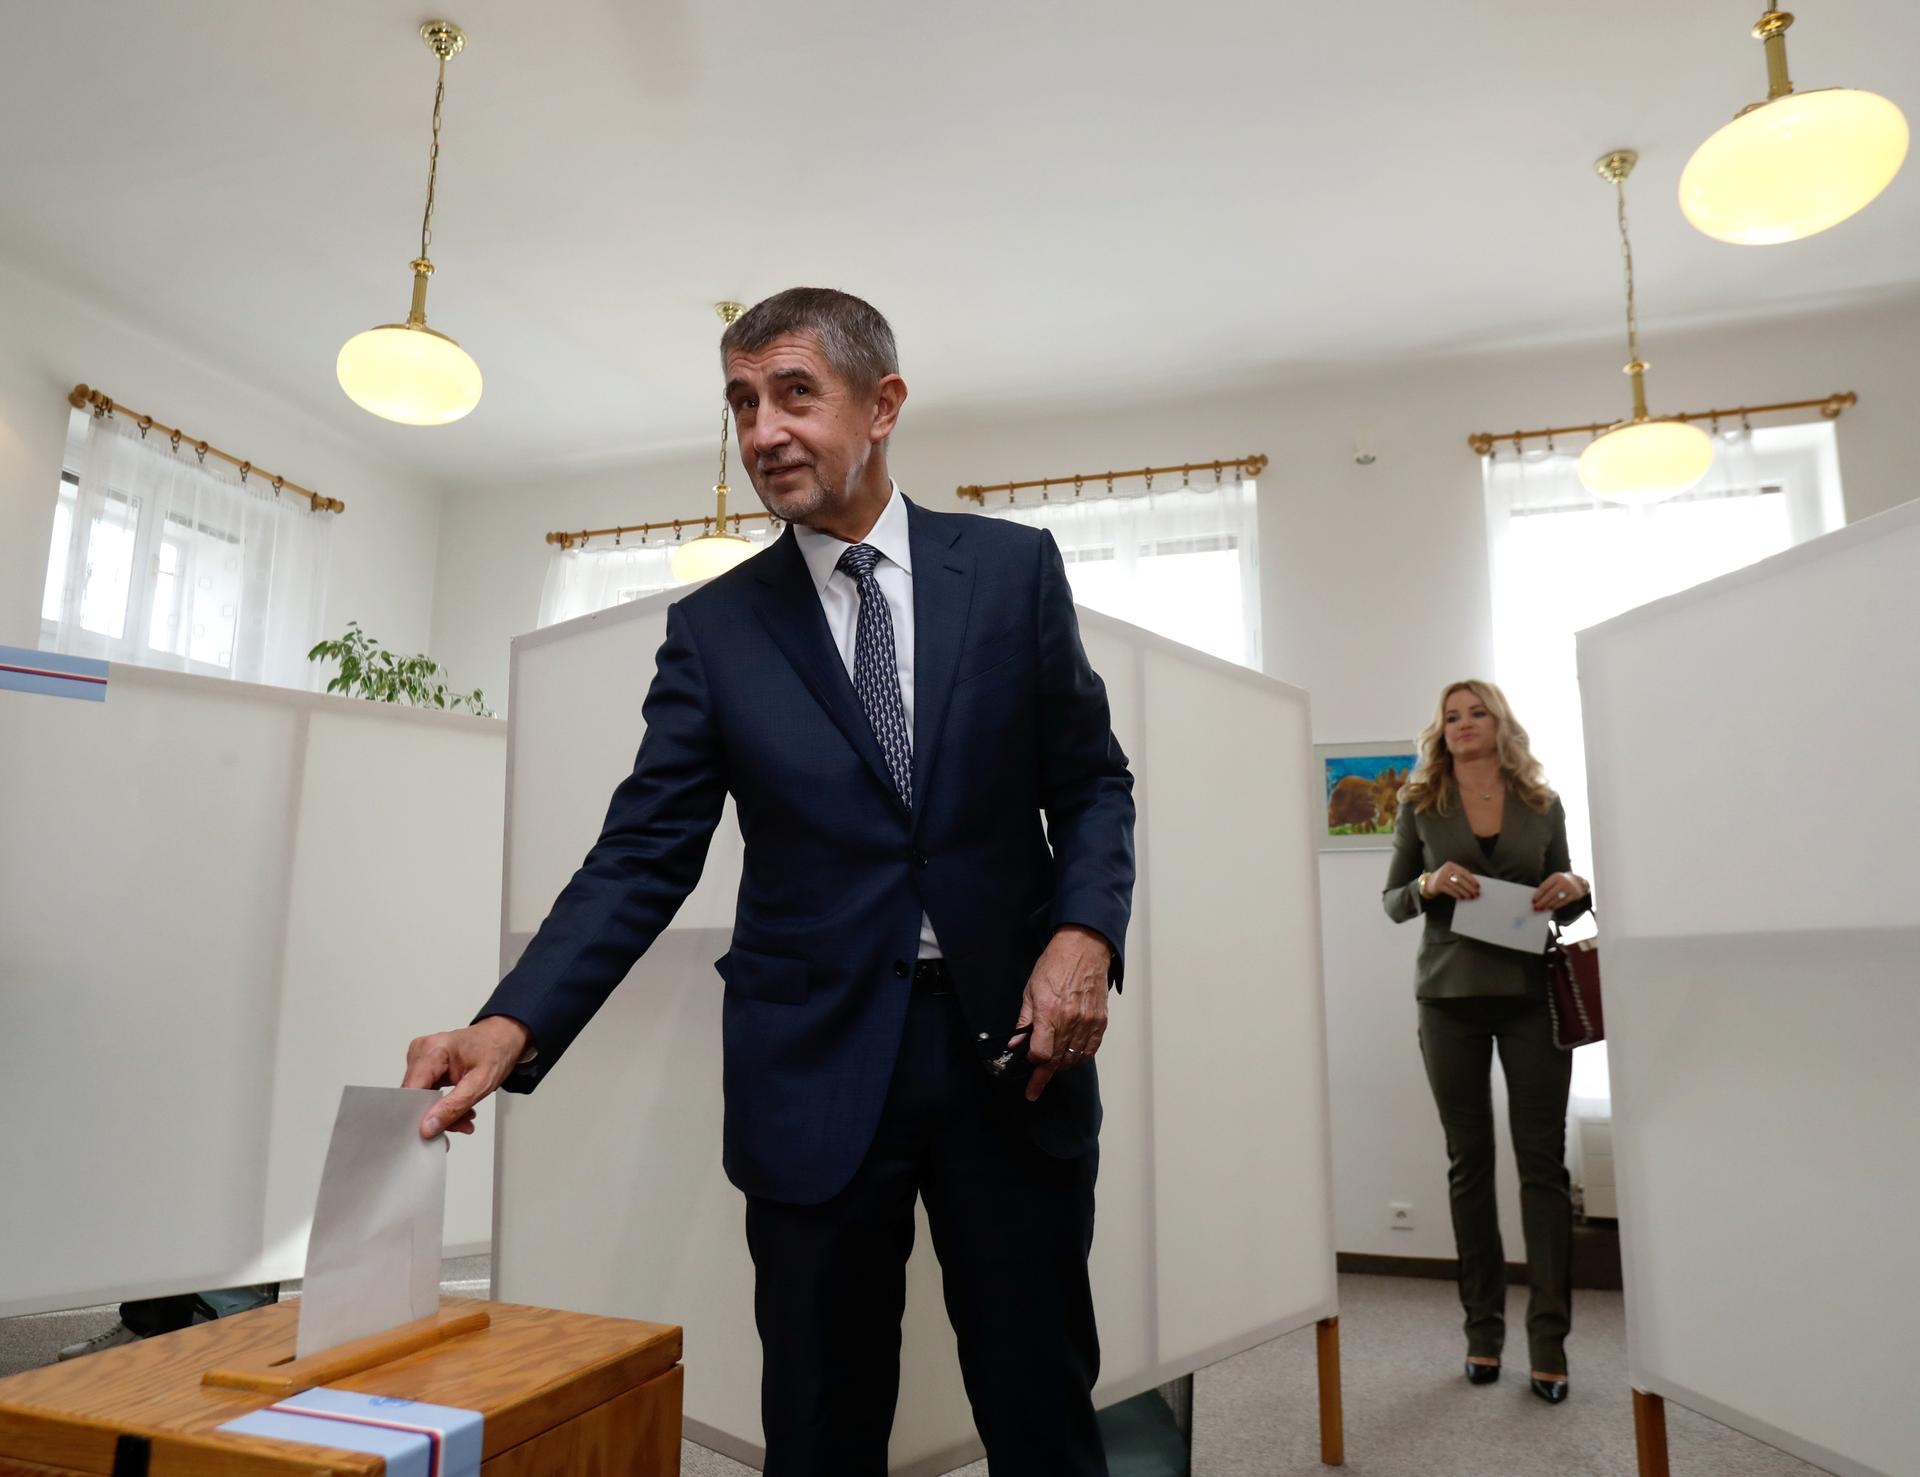 The leader of the Czech ANO party Andrej Babis casts his vote in parliamentary elections in Prague, Czech Republic, on Oct. 20, 2017.